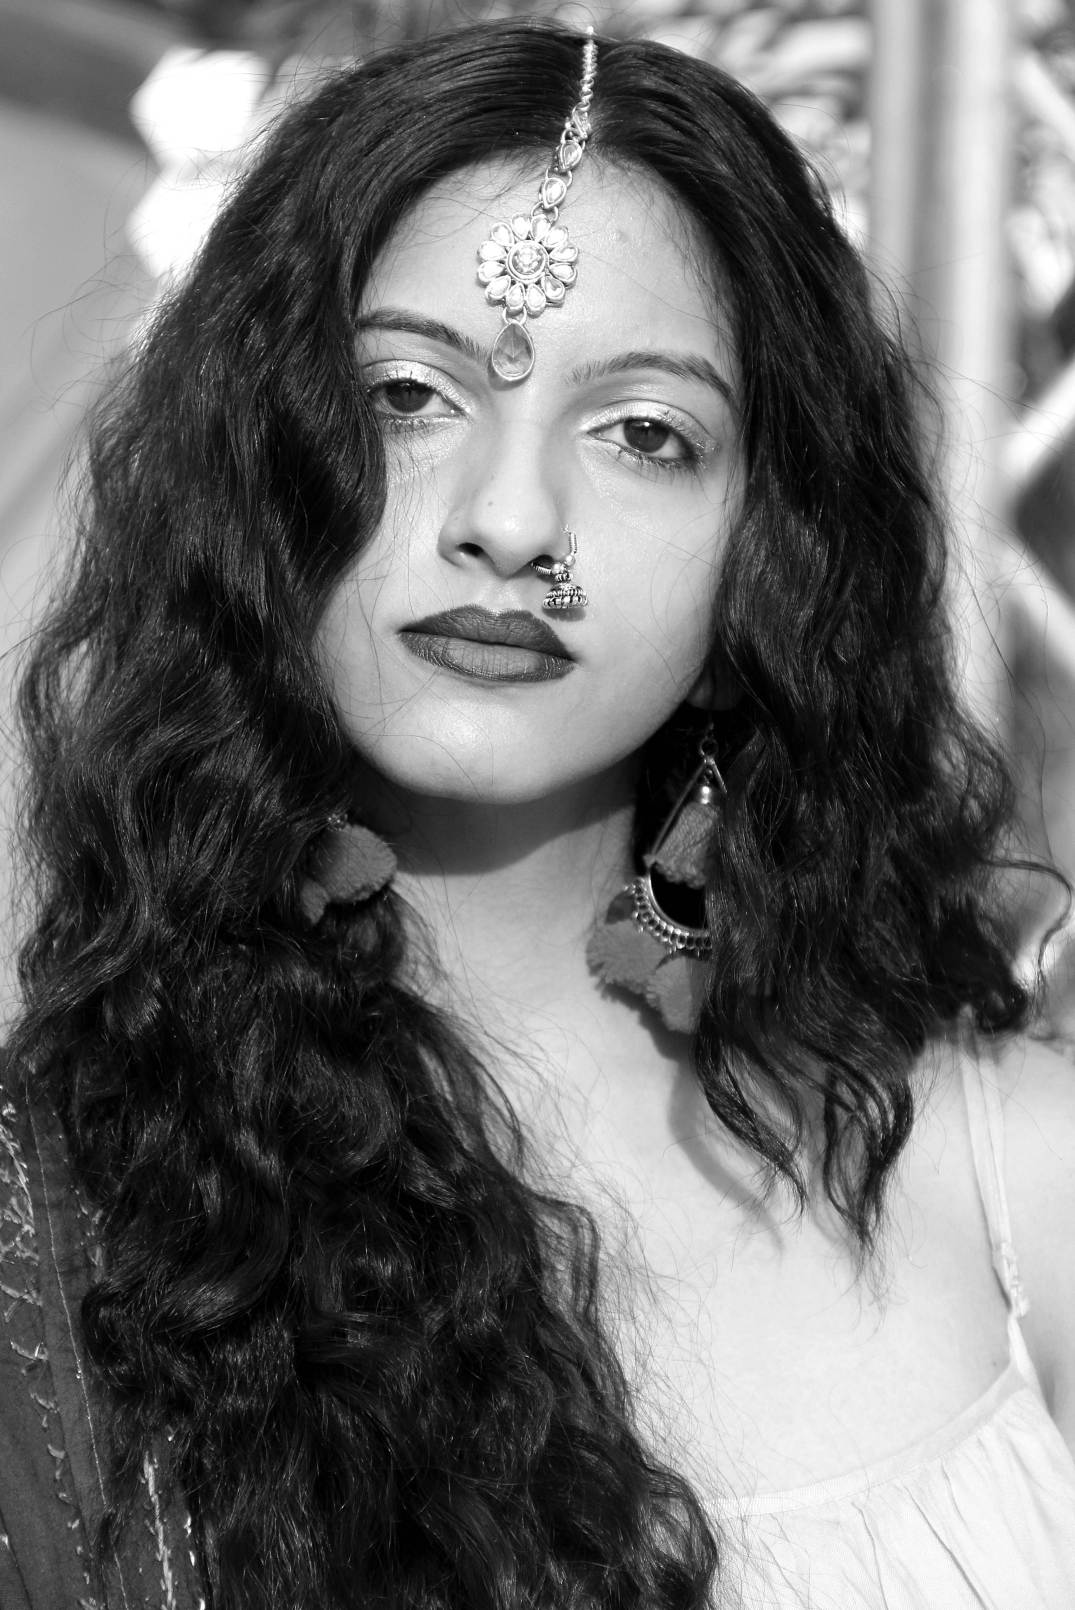 Nupur Paliwal-blogger-happy women's day-streets of india-women portraits-black and white-beauty (5)